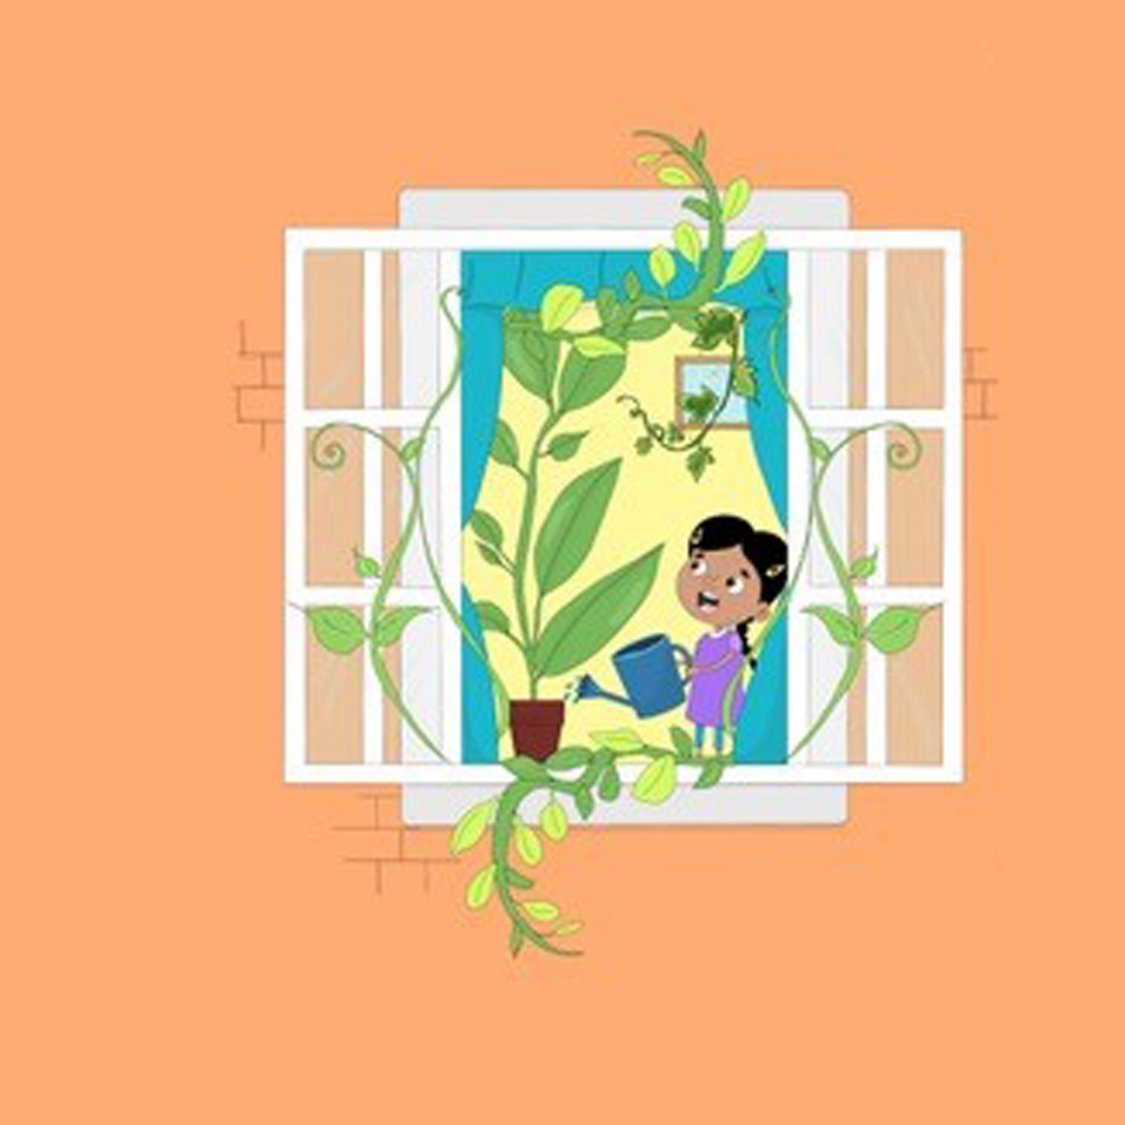 🌱 The Garden in my Living Room 🌱 Next Sunday, Ali & Spencer are going to find a gifted seed, sending them on an adventure to grow the best plant they’ve ever seen. What will it become? Why not bring along your little people & see what happens? 🔗attenborougharts.ticketsolve.com/ticketbooth/sh…